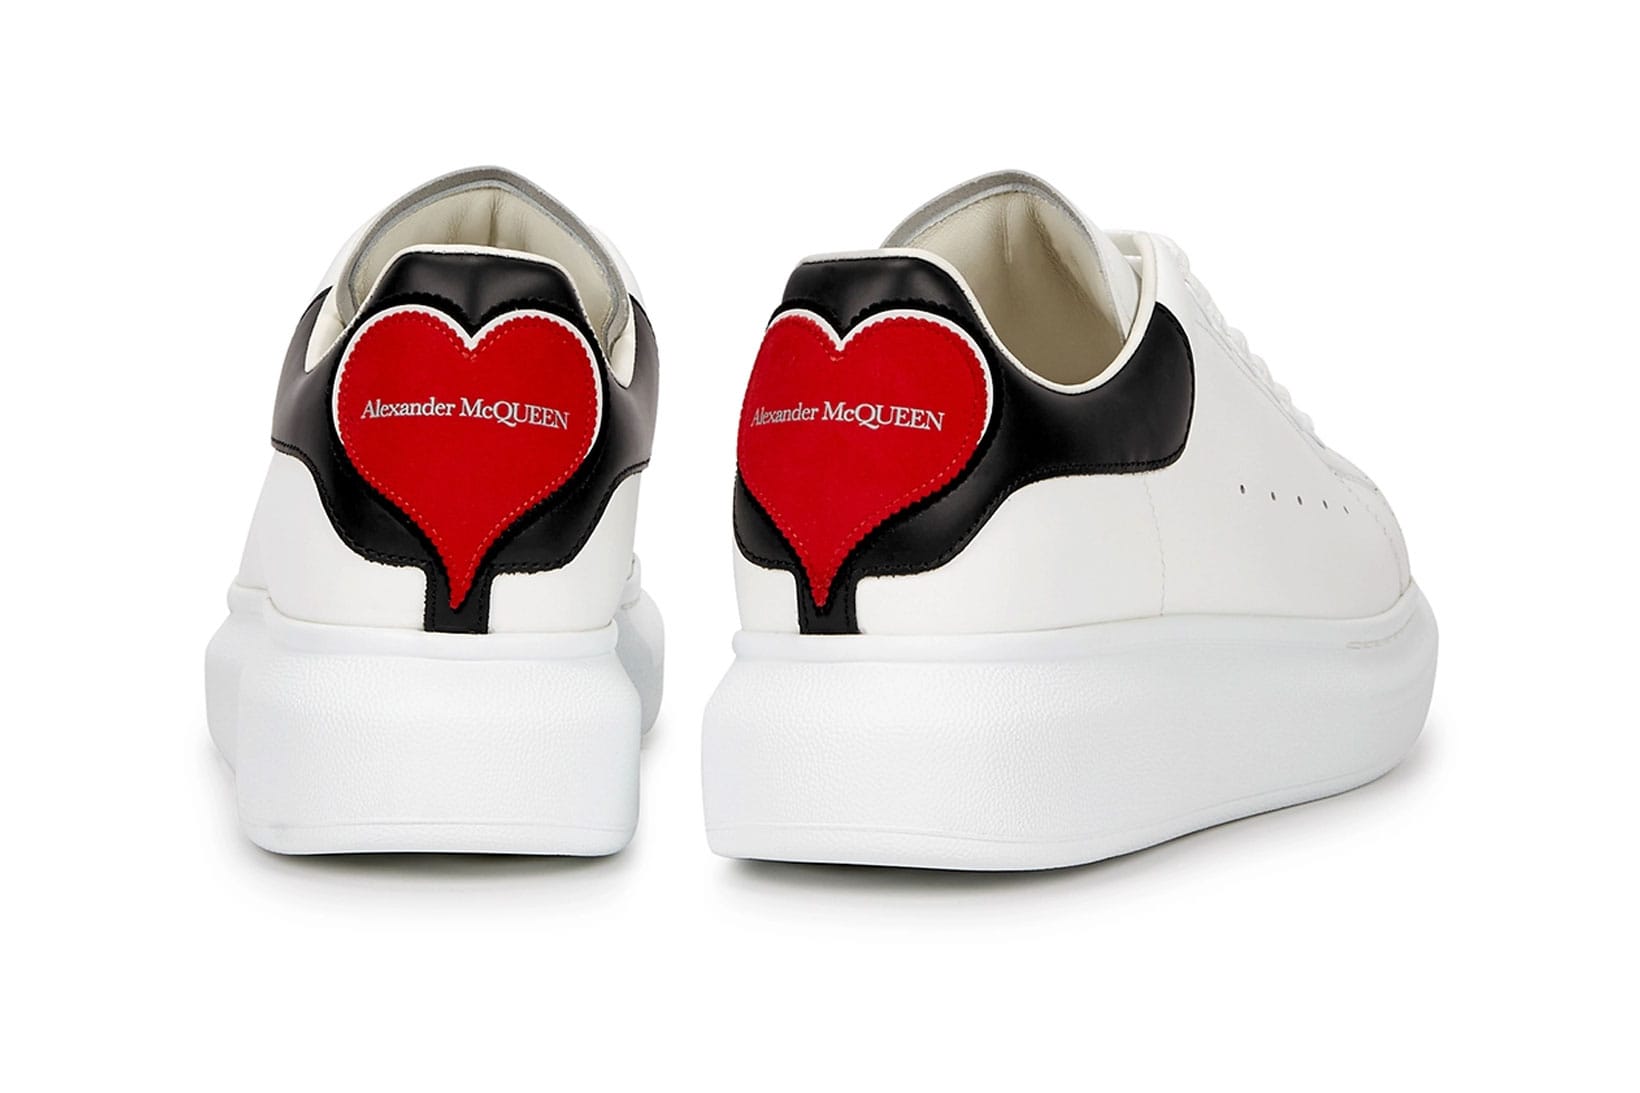 Alexander McQueen Oversized Leather Sneakers (White/Lust Red) EU41 | eBay